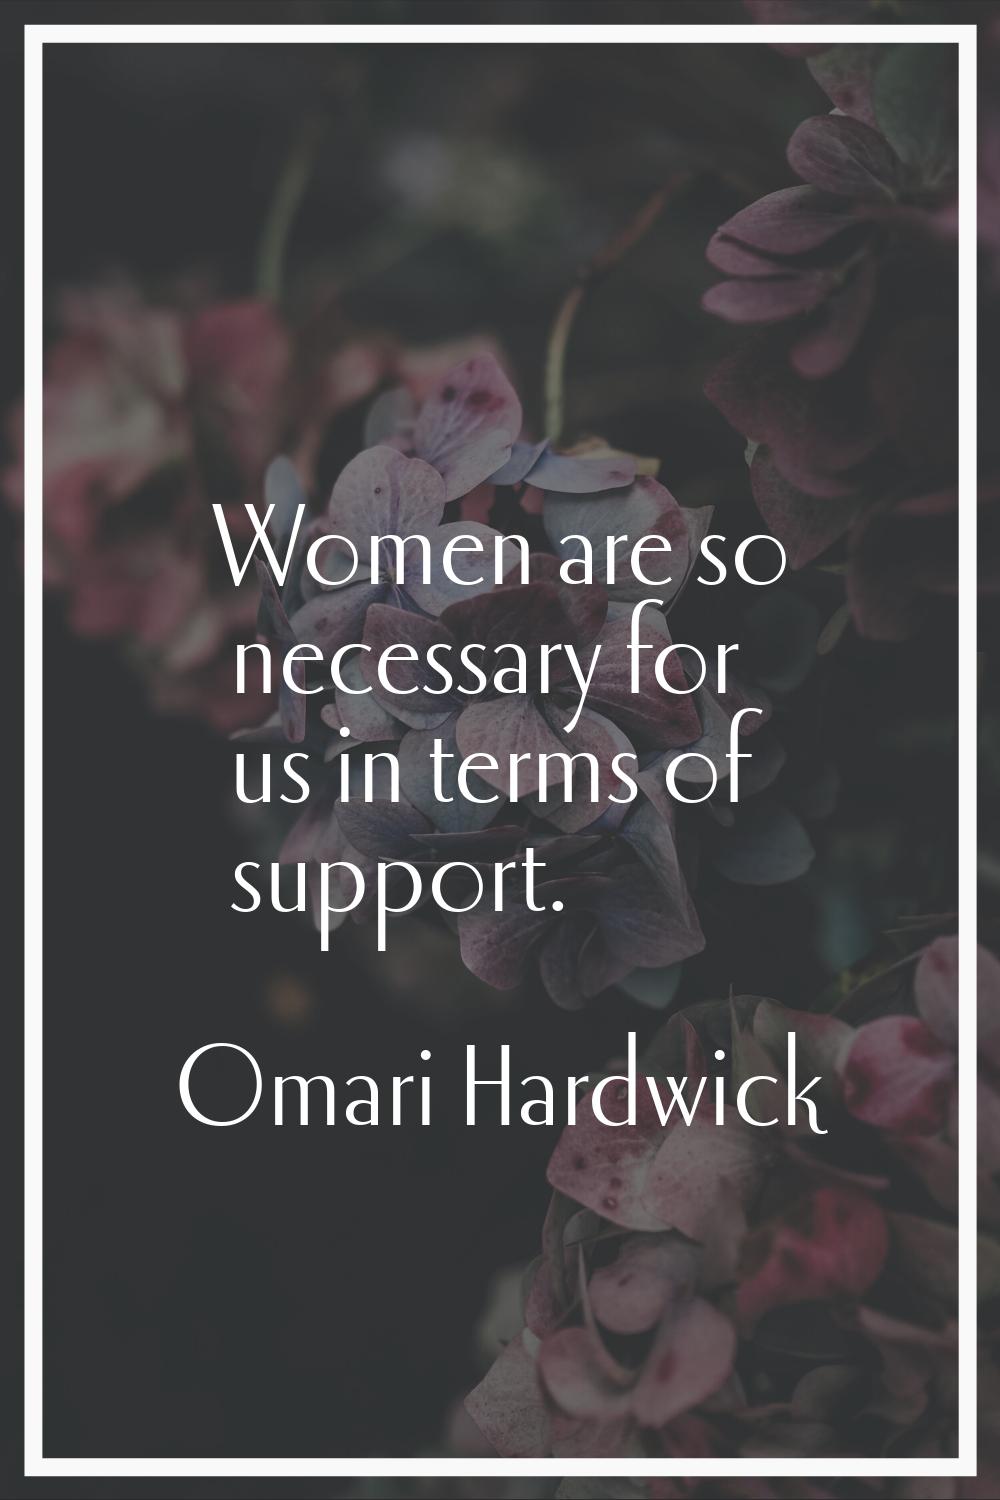 Women are so necessary for us in terms of support.